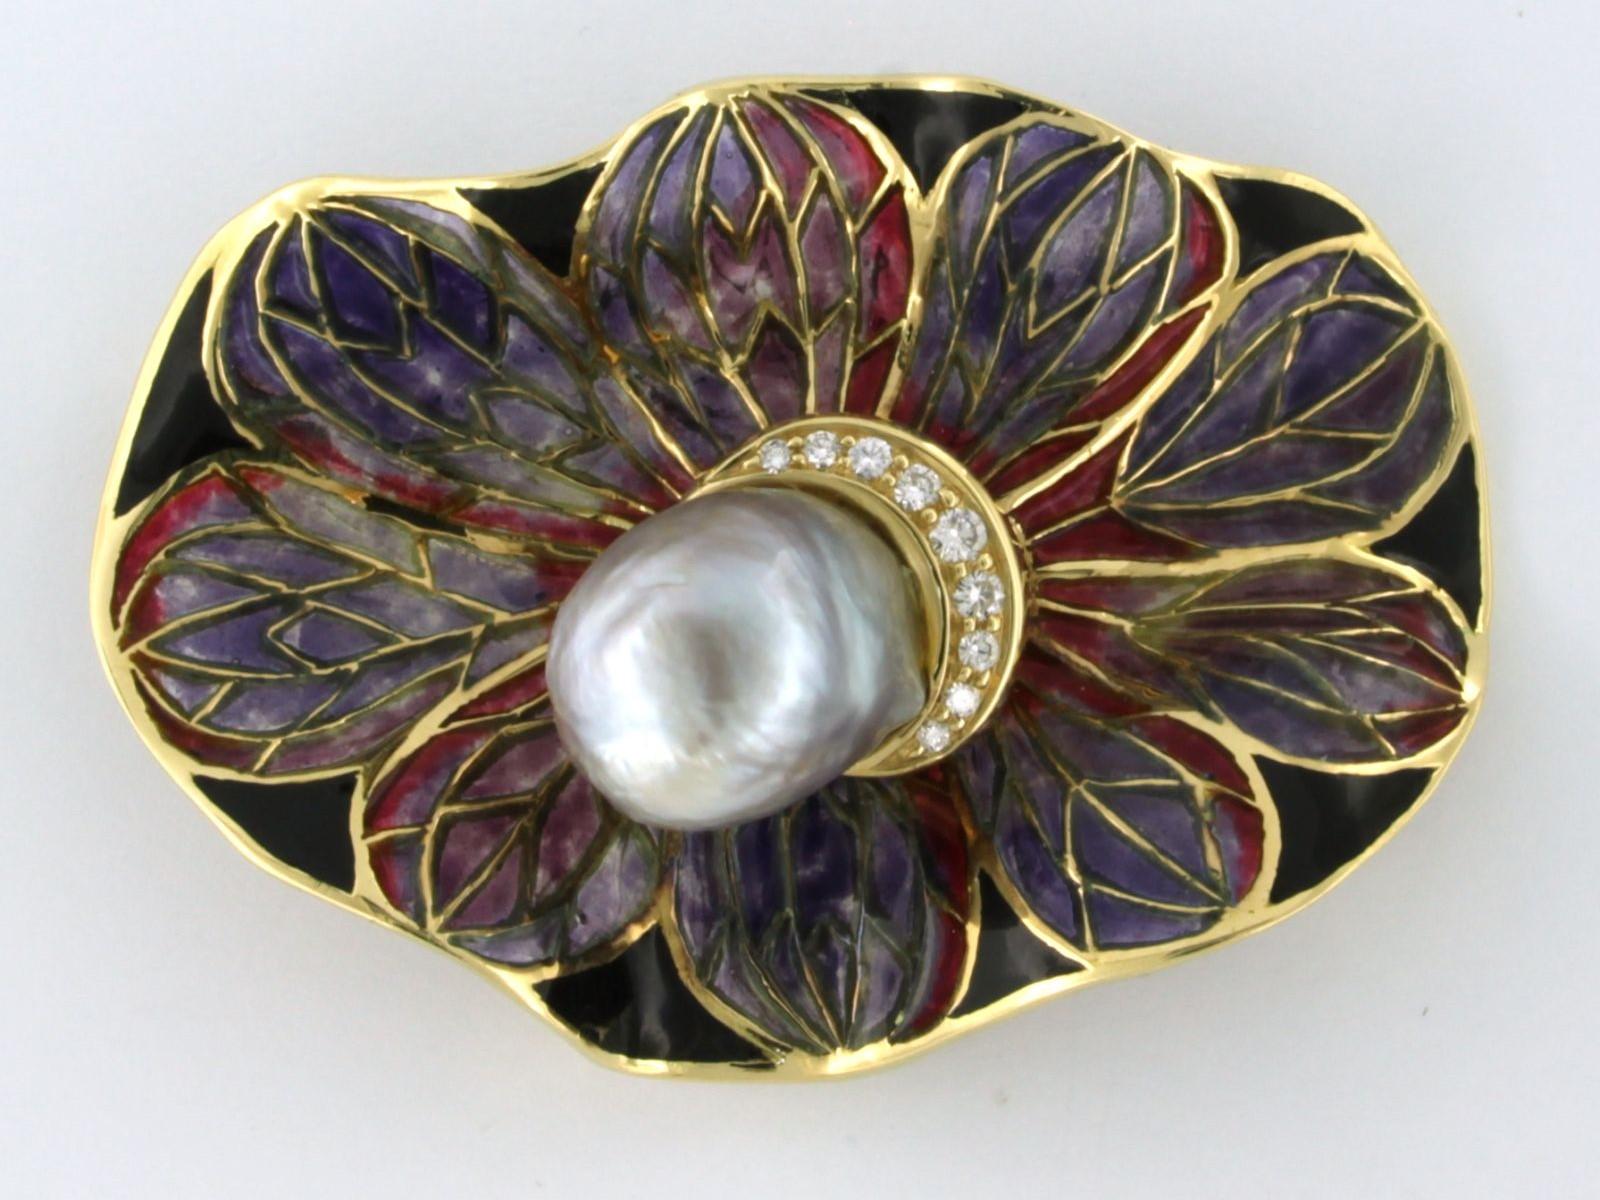 18 kt yellow gold brooch decorated with window enamel set with South Sea pearl and brilliant cut diamond to. 0.25ct - F/G - VS/SI

detailed description:

The size of the brooch is 4.2 cm long by 6.0 cm wide and 1.8 cm high

weight: 29.1 grams

put